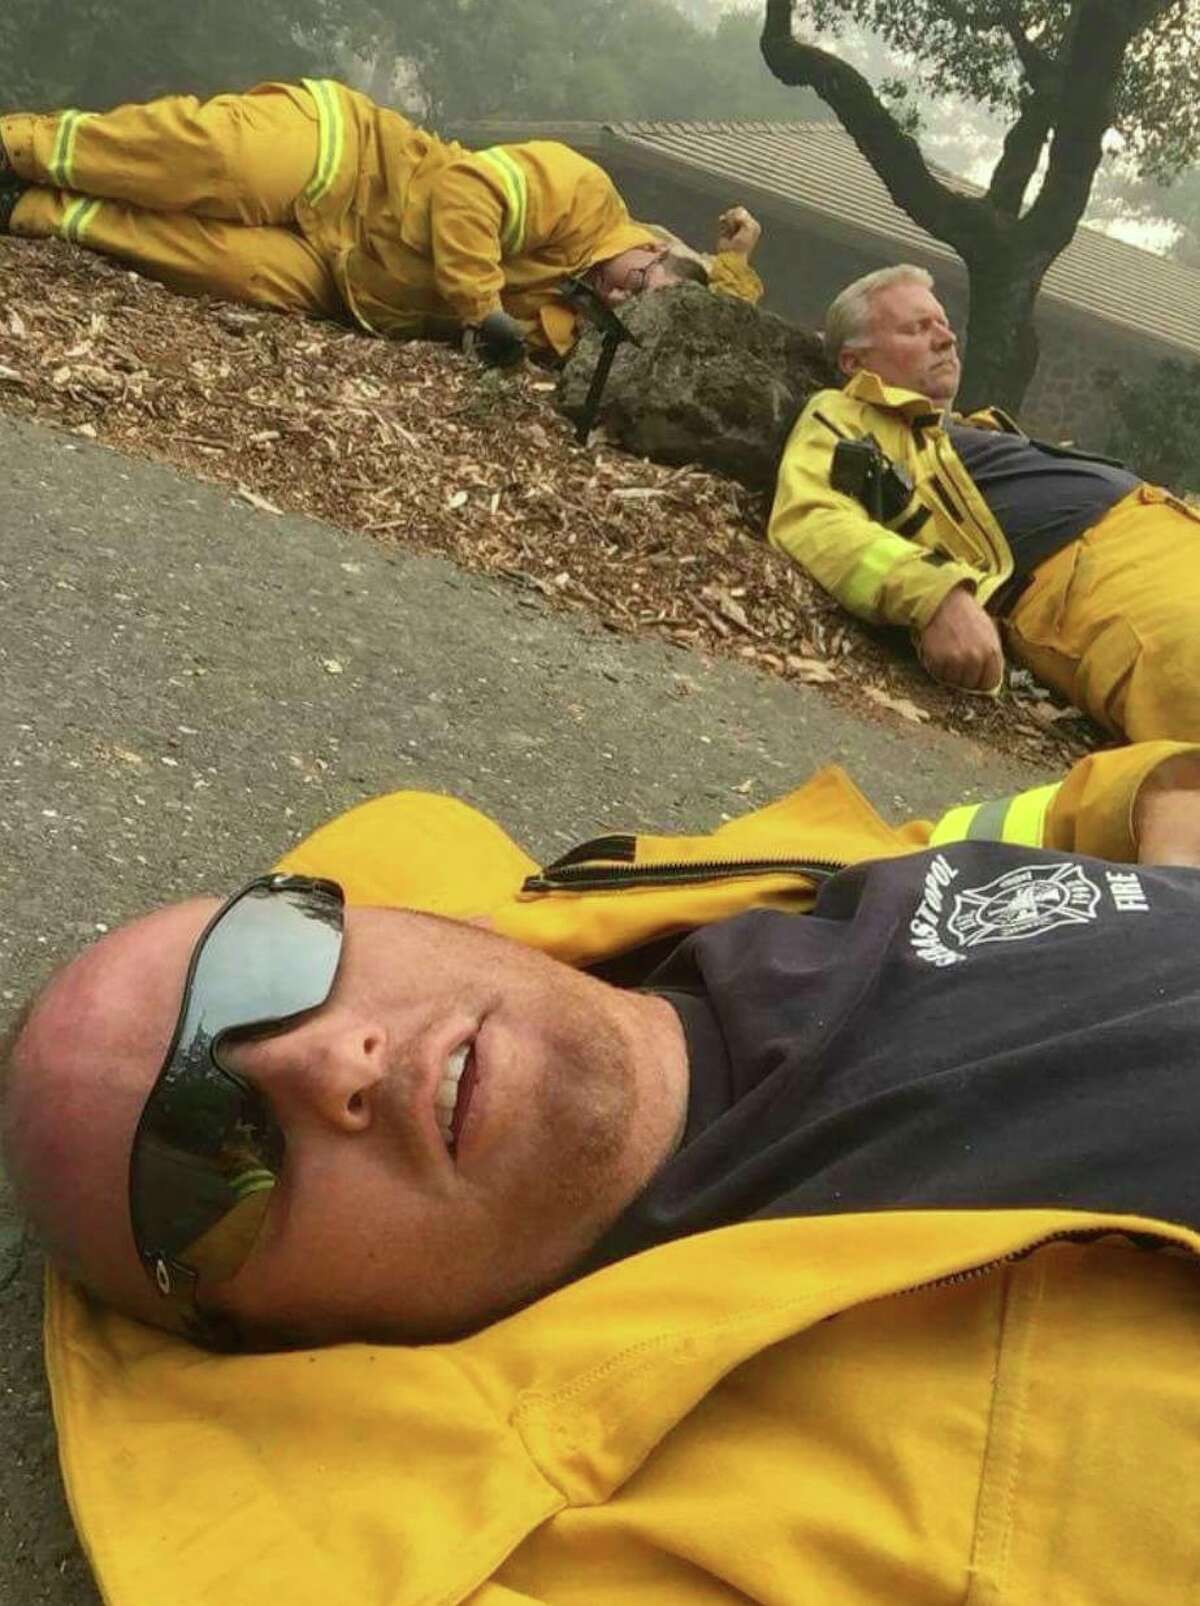 Kiara Evan shared this photo of exhausted first responders taking a break while fighting the Wine Country fires.